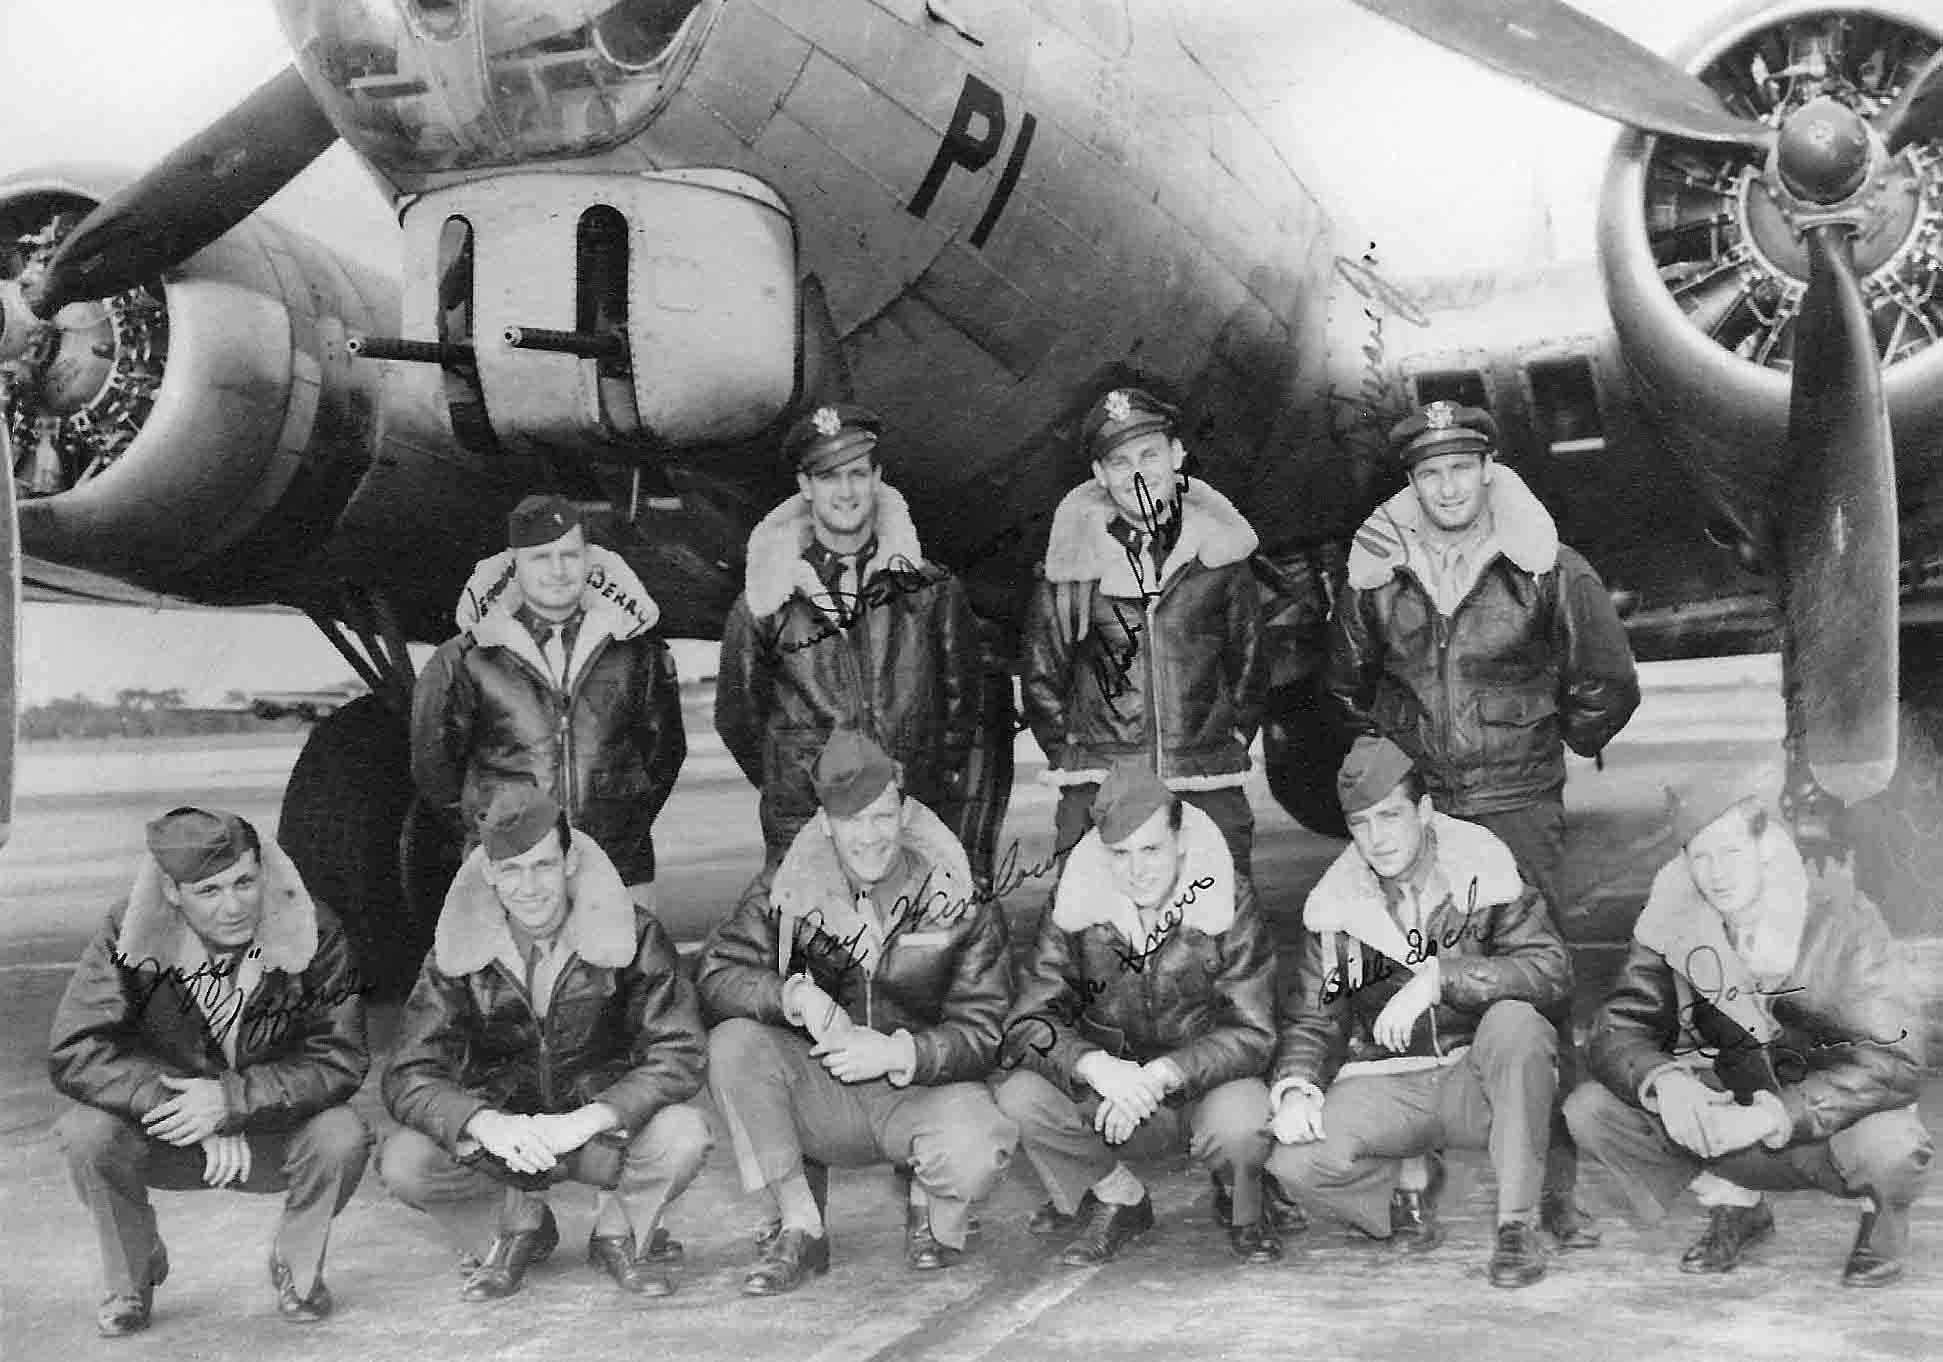 Gieryn's Crew - 603rd Squadron - Training - Probably 1944